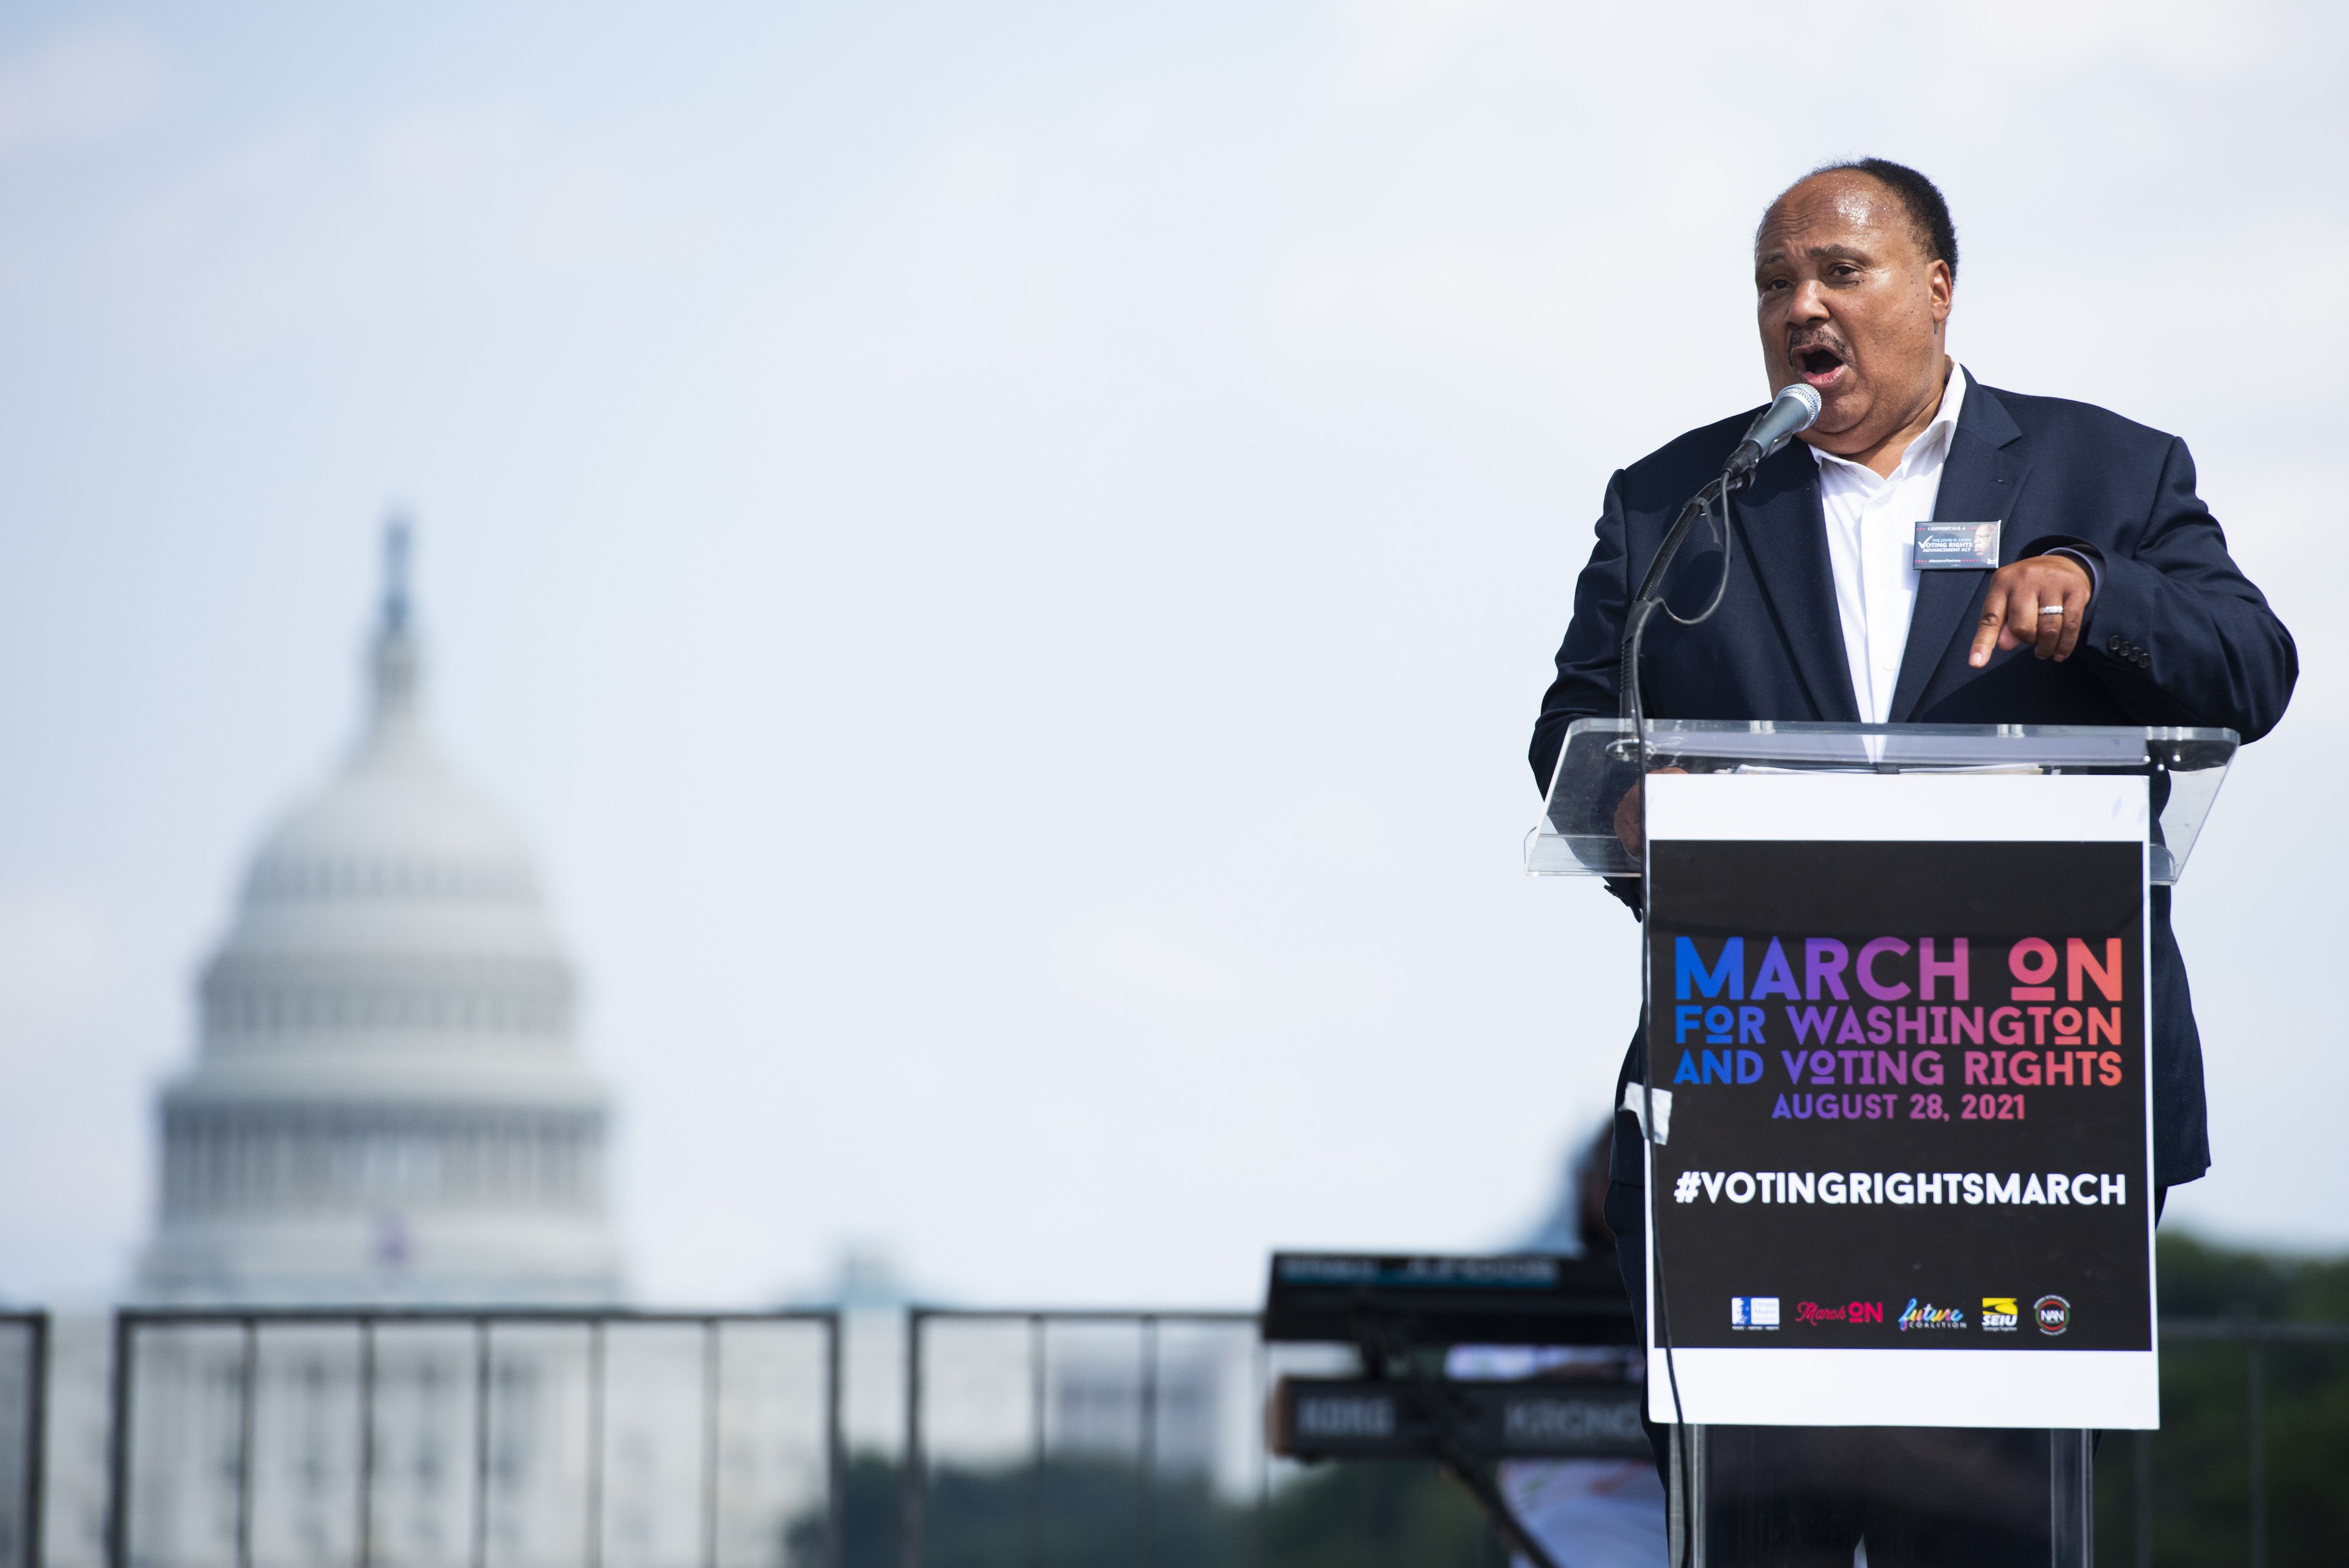 Martin Luther King III speaks during the March On for Washington and Voting Rights rally in Washington, D.C., U.S., on Saturday, Aug. 28, 2021. 